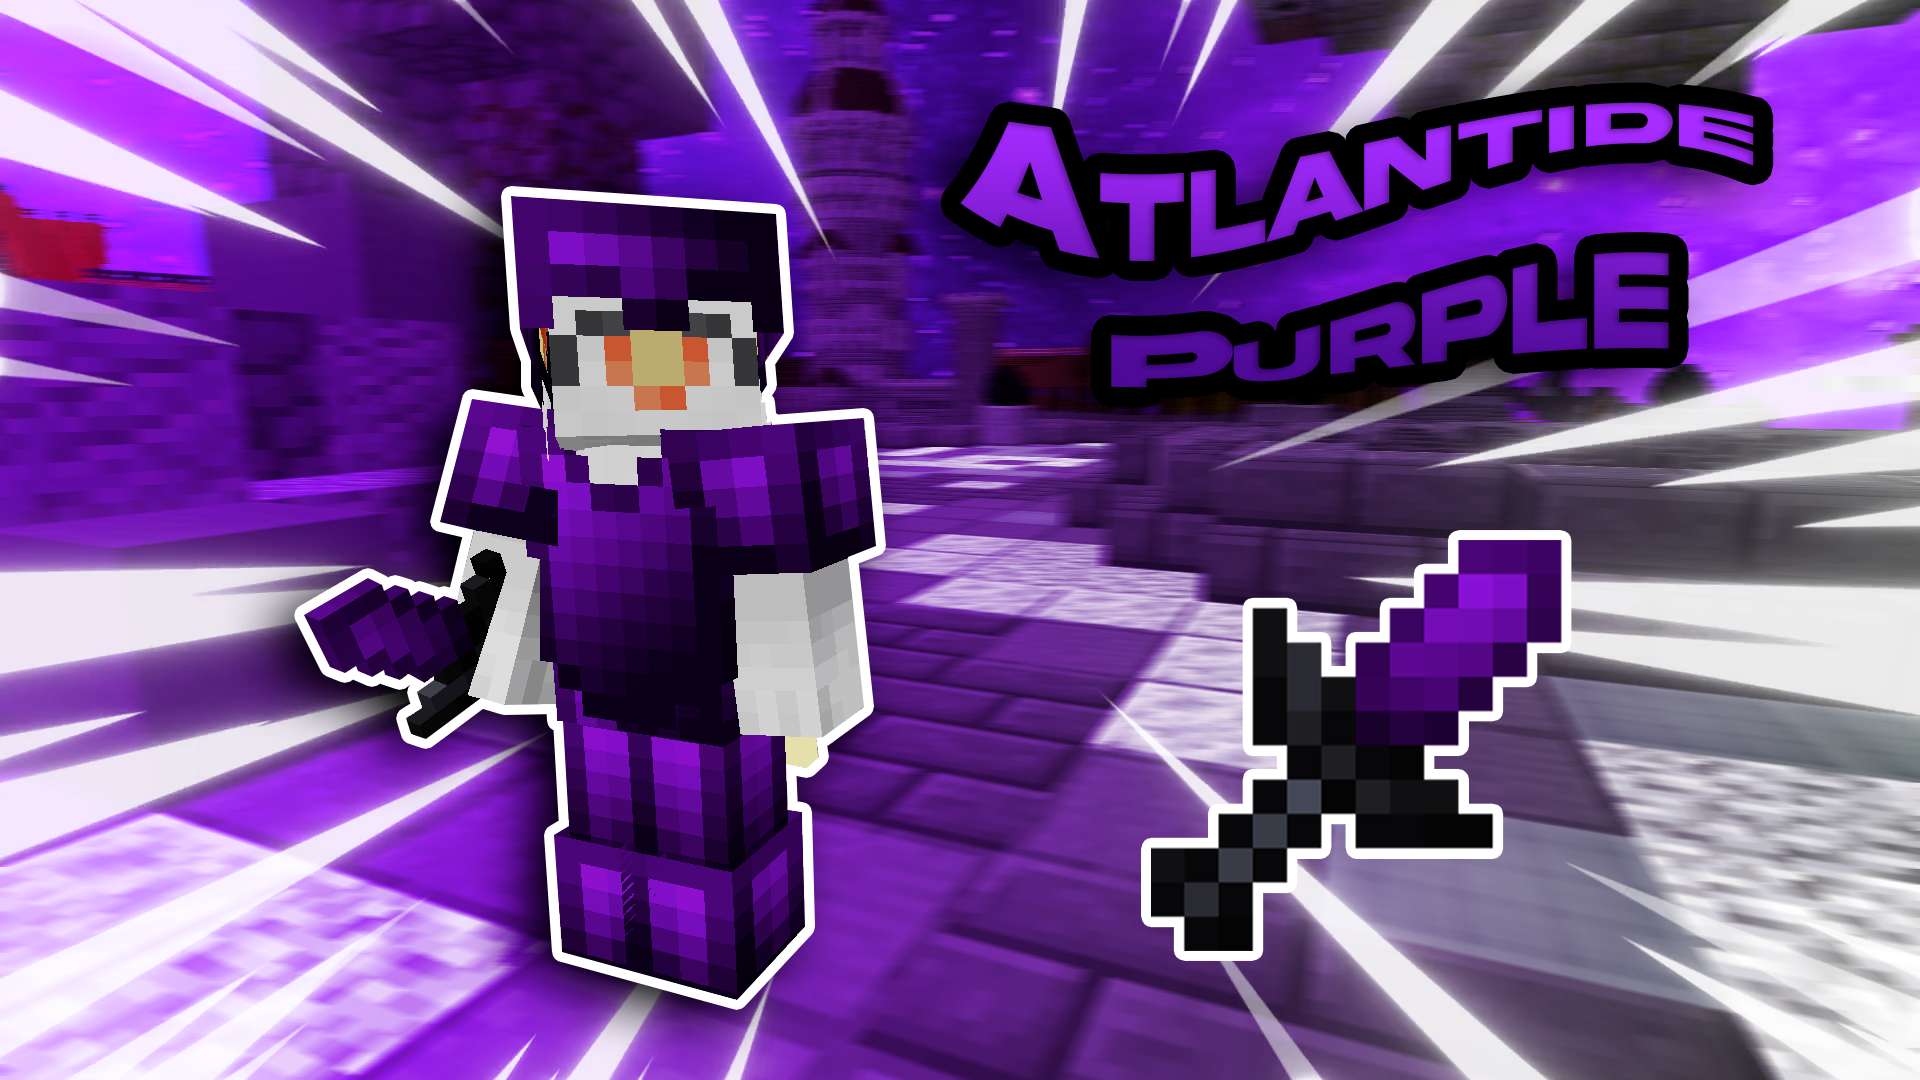 Gallery Banner for Atlantide (Purple) on PvPRP